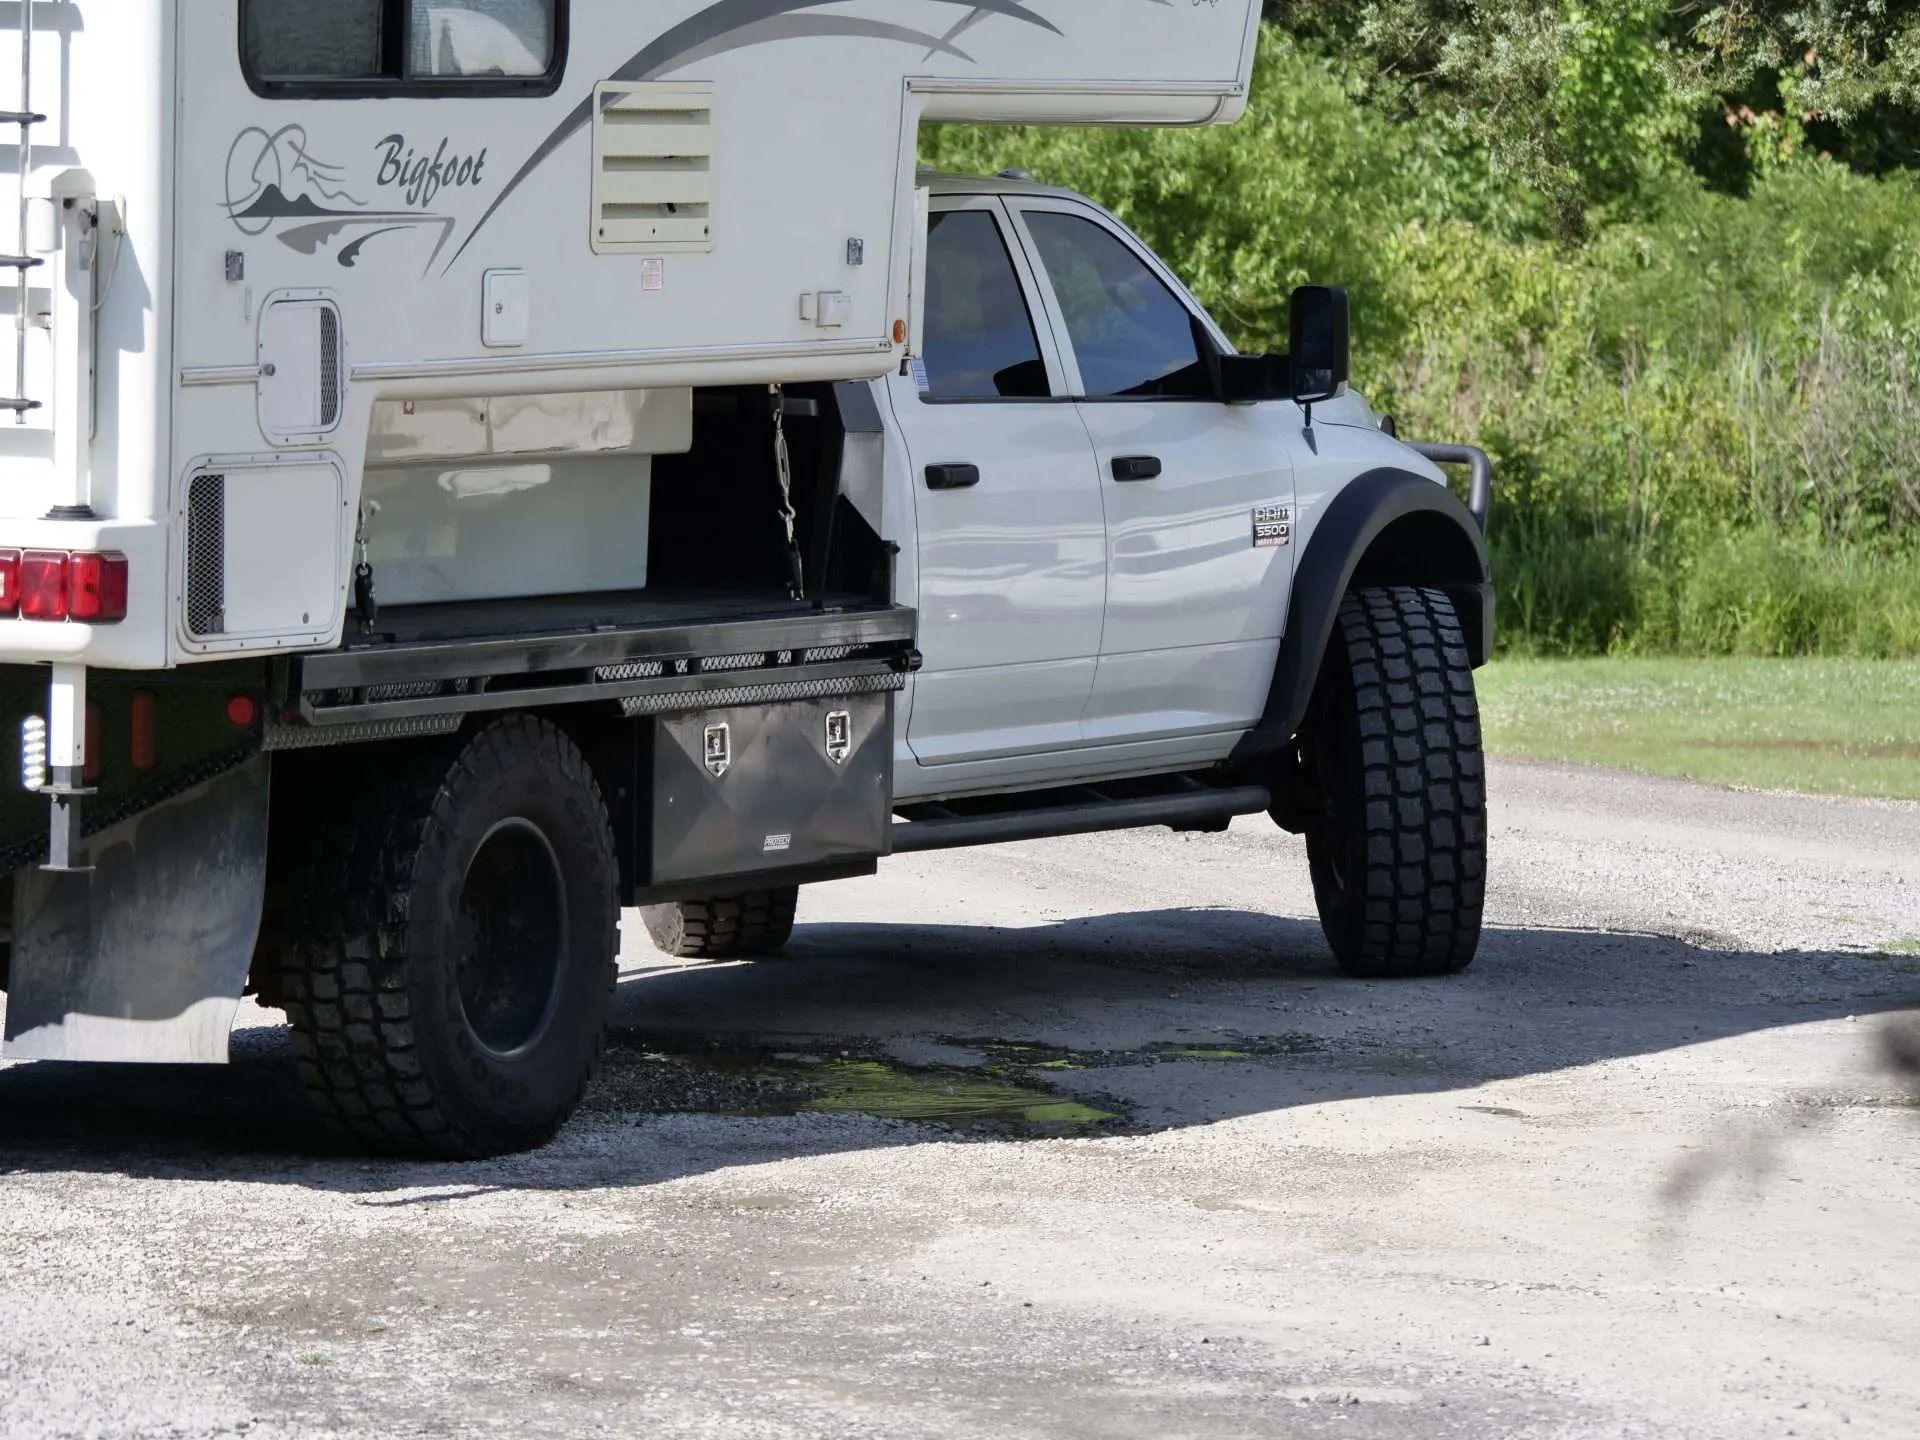 Truck with truck camper installed and large tire modification